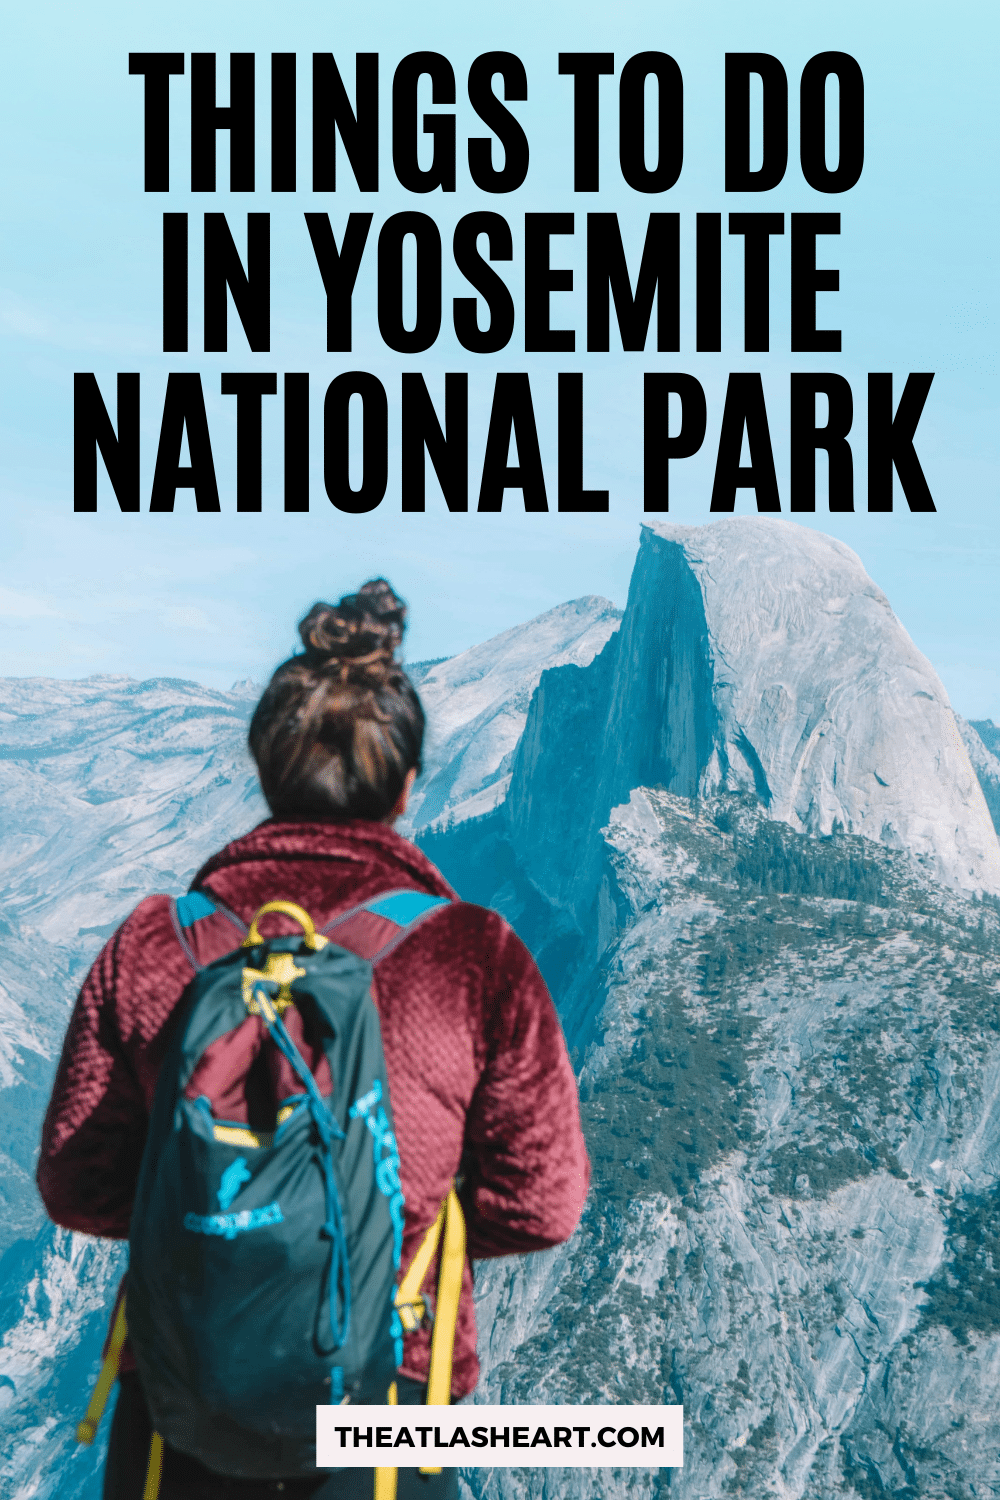 31 Things to do in Yosemite National Park (Ultimate Bucket List)